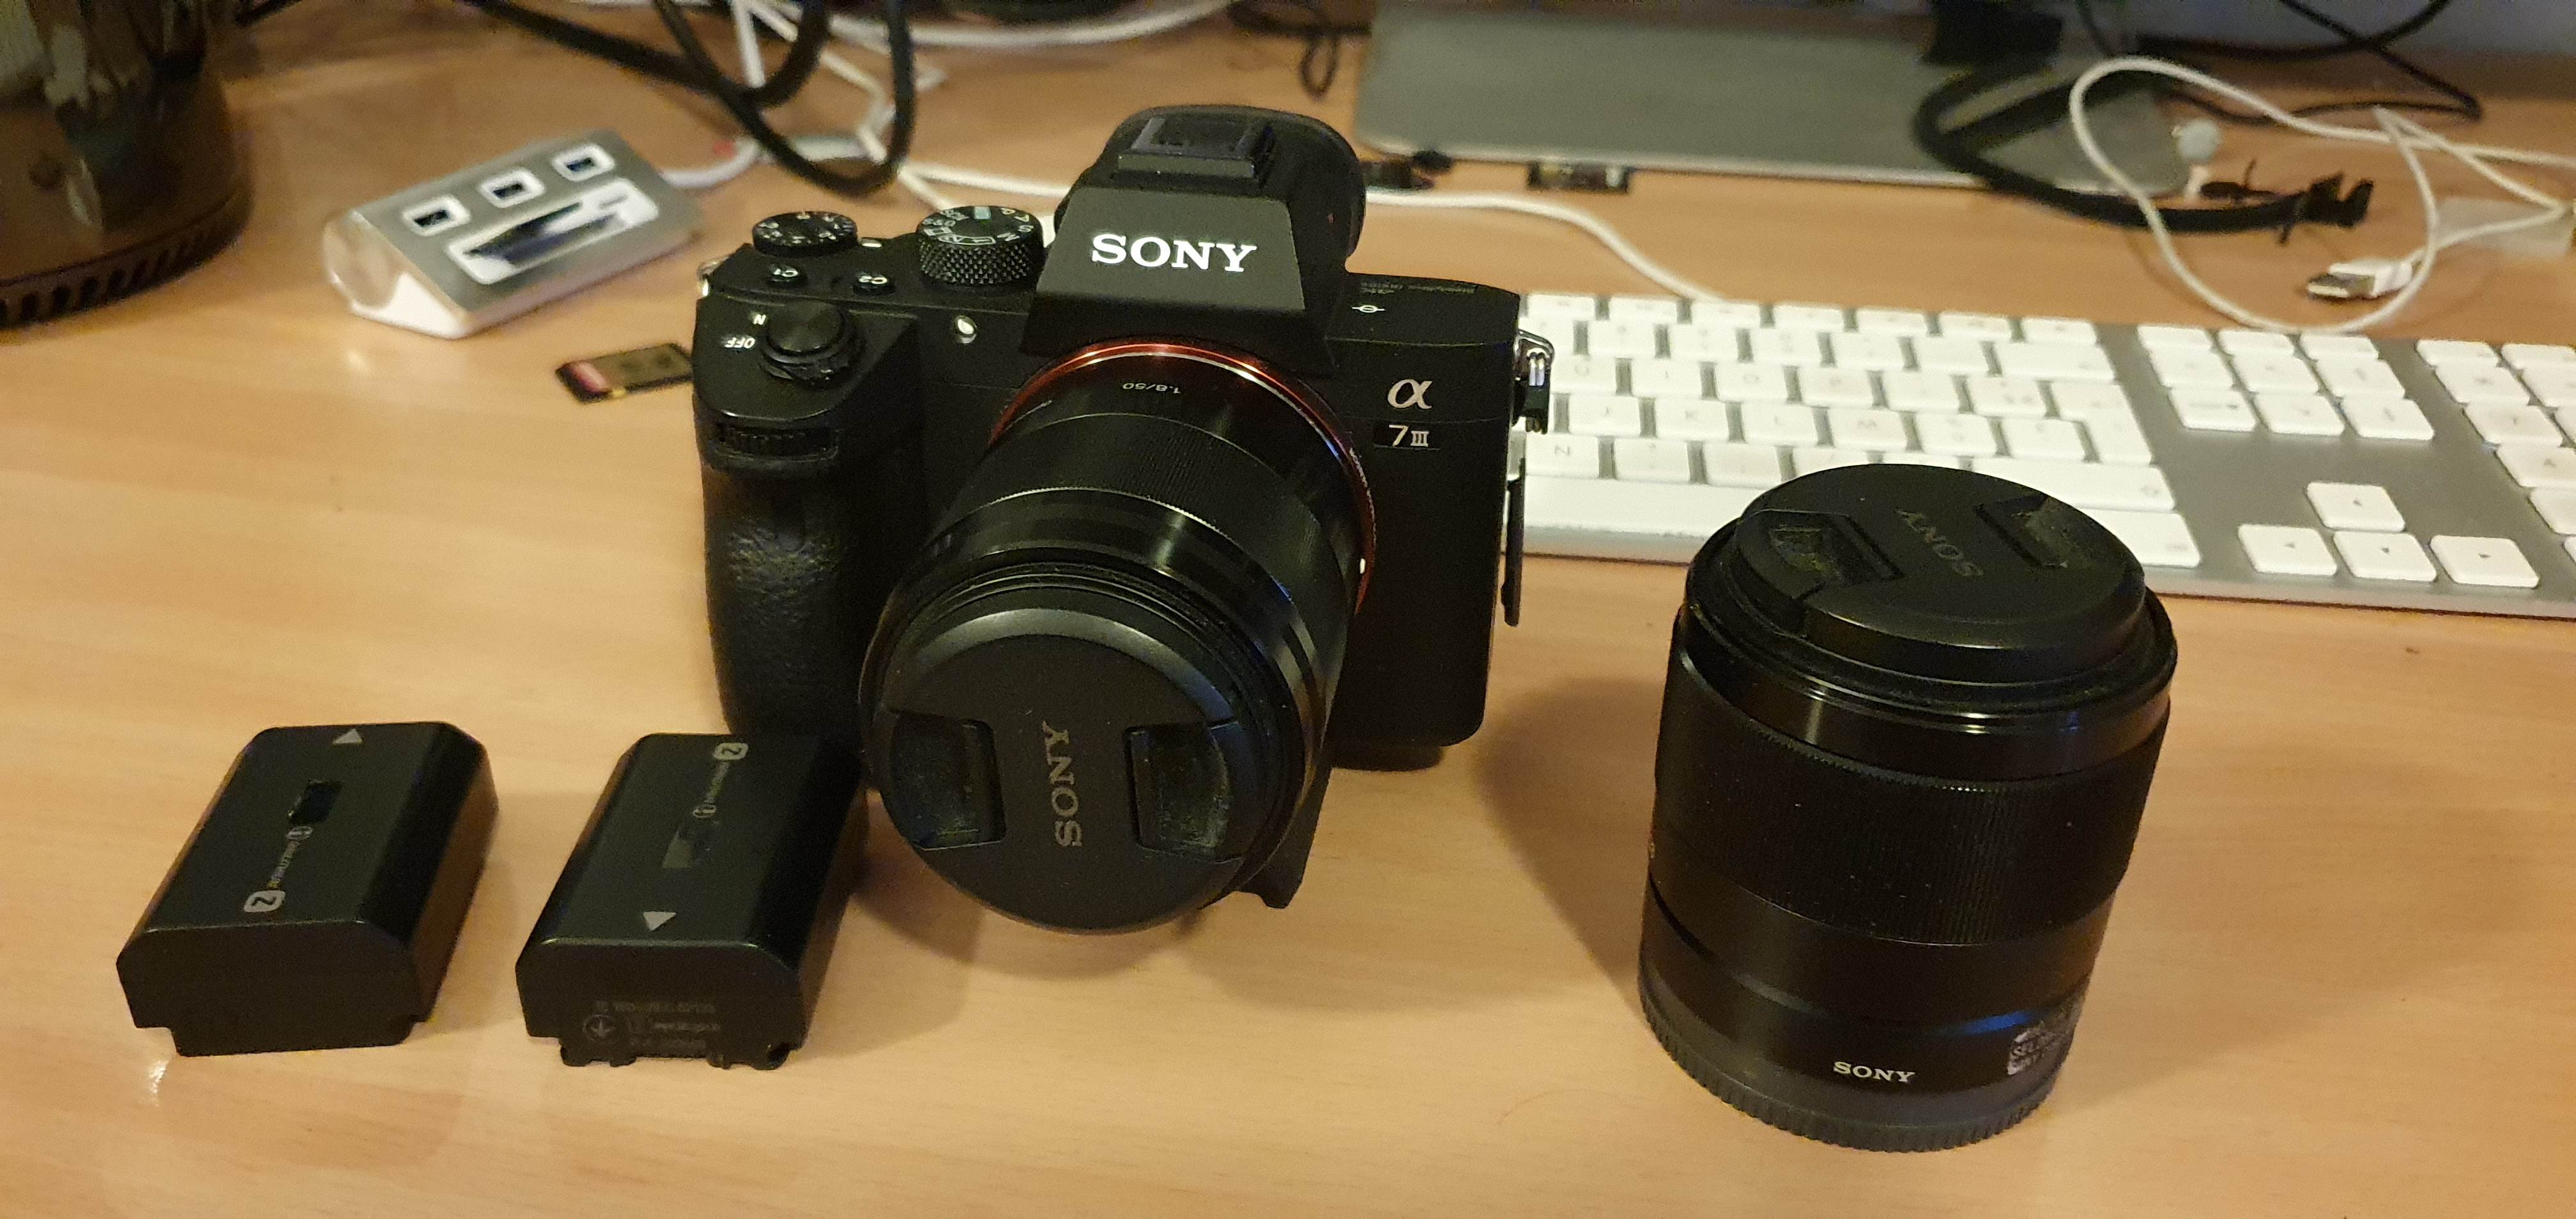 Annonce occasions - Sony a7III + objectif - Le Repaire - Le Repaire